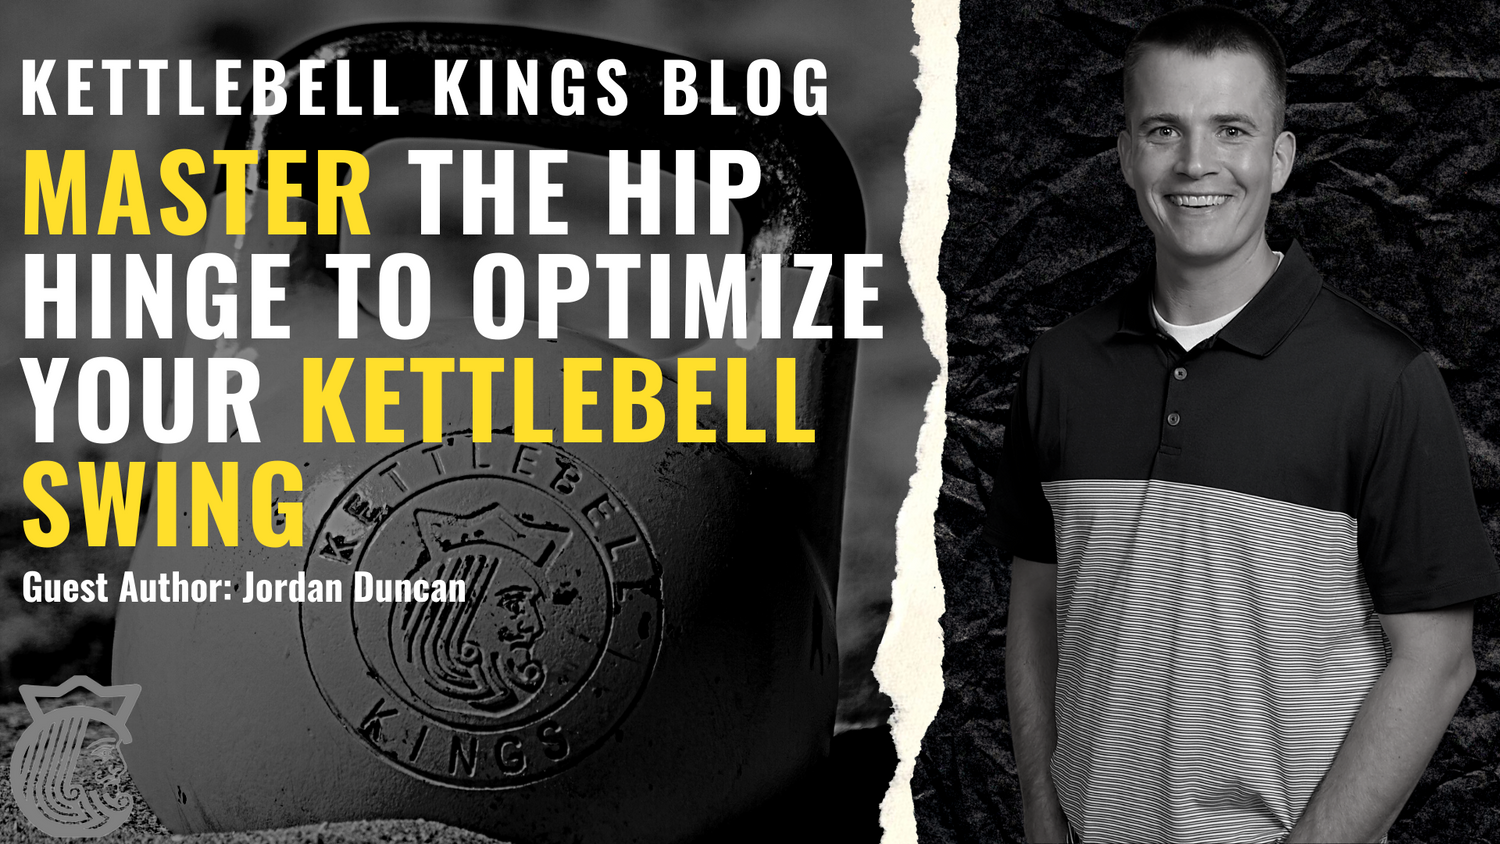 Master the Hip Hinge to Optimize Your Kettlebell Swing